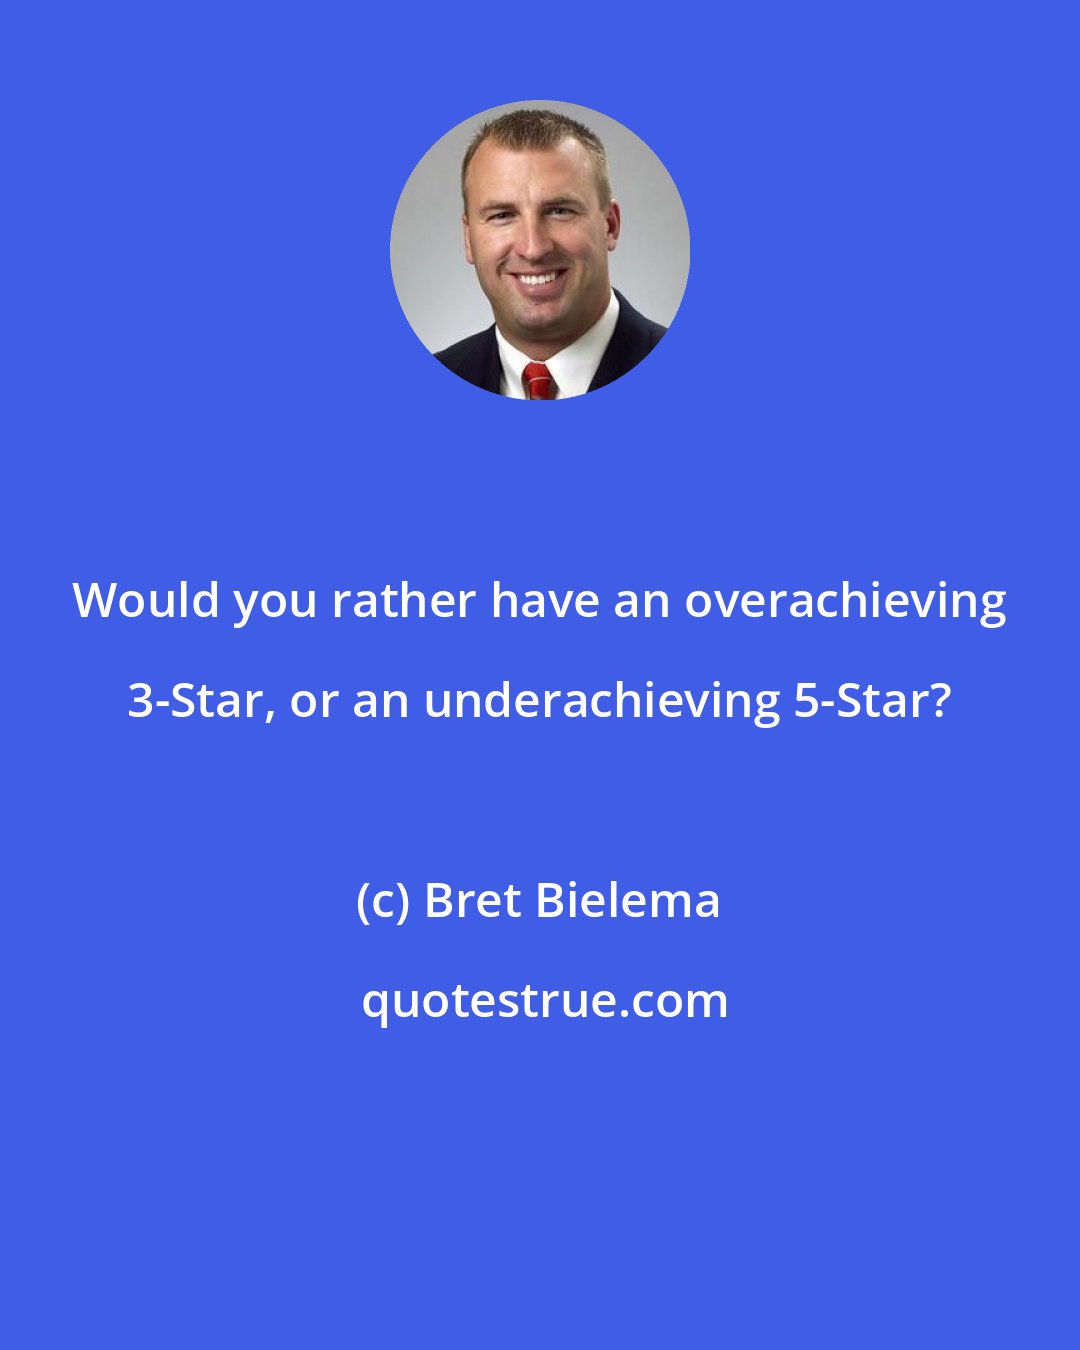 Bret Bielema: Would you rather have an overachieving 3-Star, or an underachieving 5-Star?